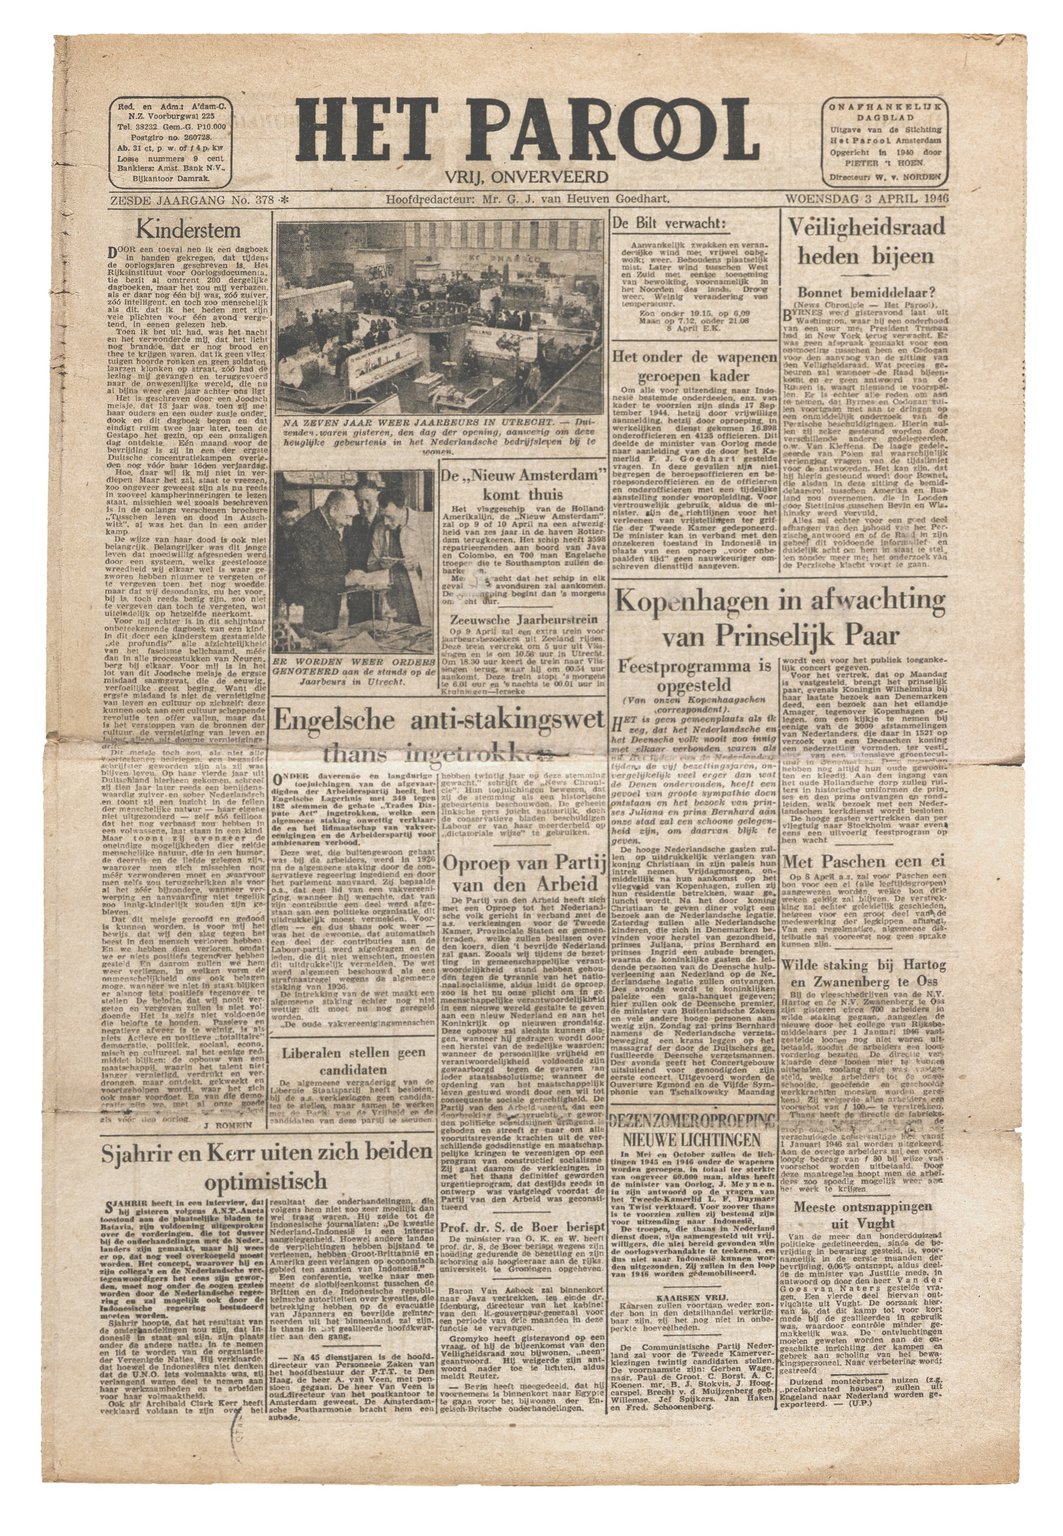 The article 'Kinderstem' (‘A child’s voice’) by Jan Romein on the front page of Amsterdam newspaper Het Parool, 3 April 1946.